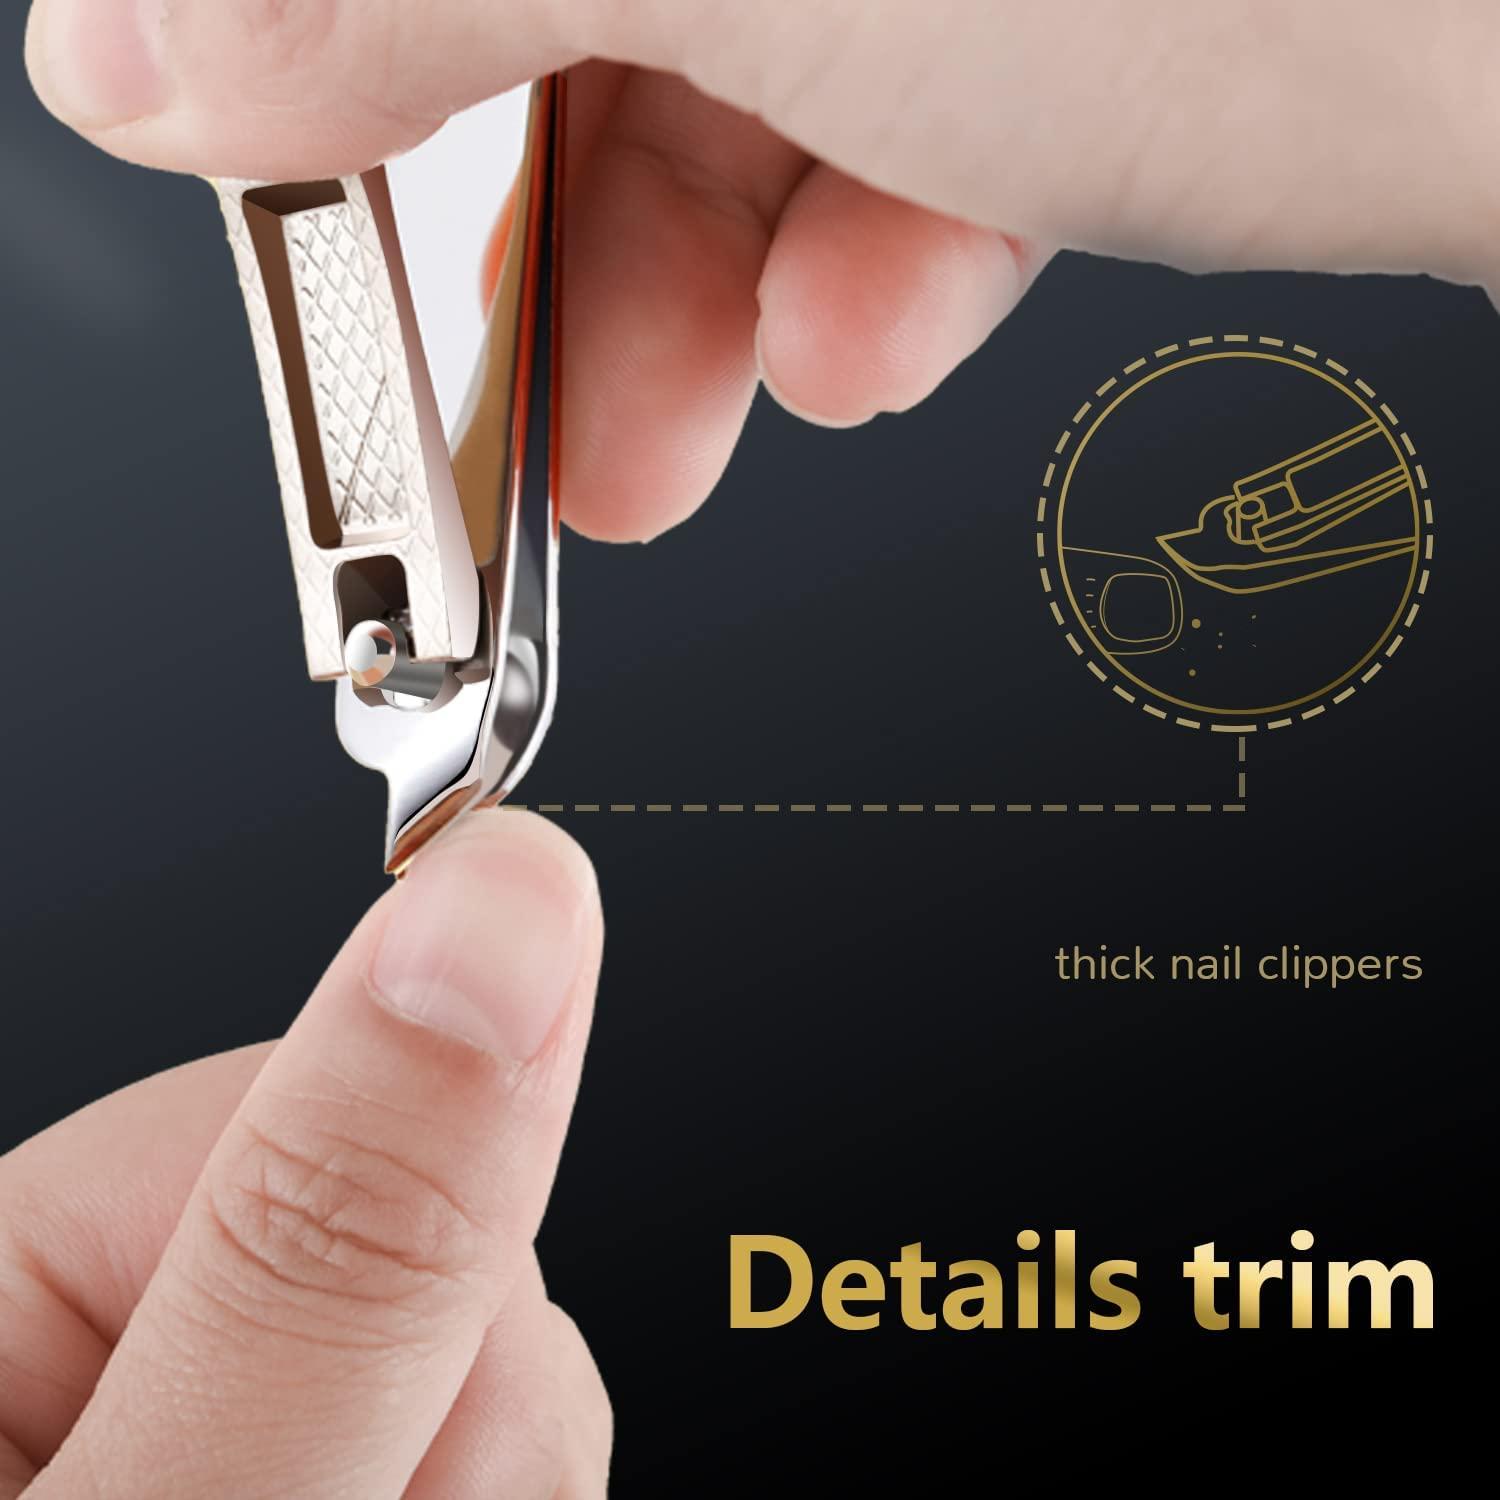  Toenail Clippers for Seniors Thick Toenails, Toe Nail Clippers  Adult Thick Nails Long Handle, Professional Heavy Duty Nail Clippers 6Pcs  Black : Beauty & Personal Care